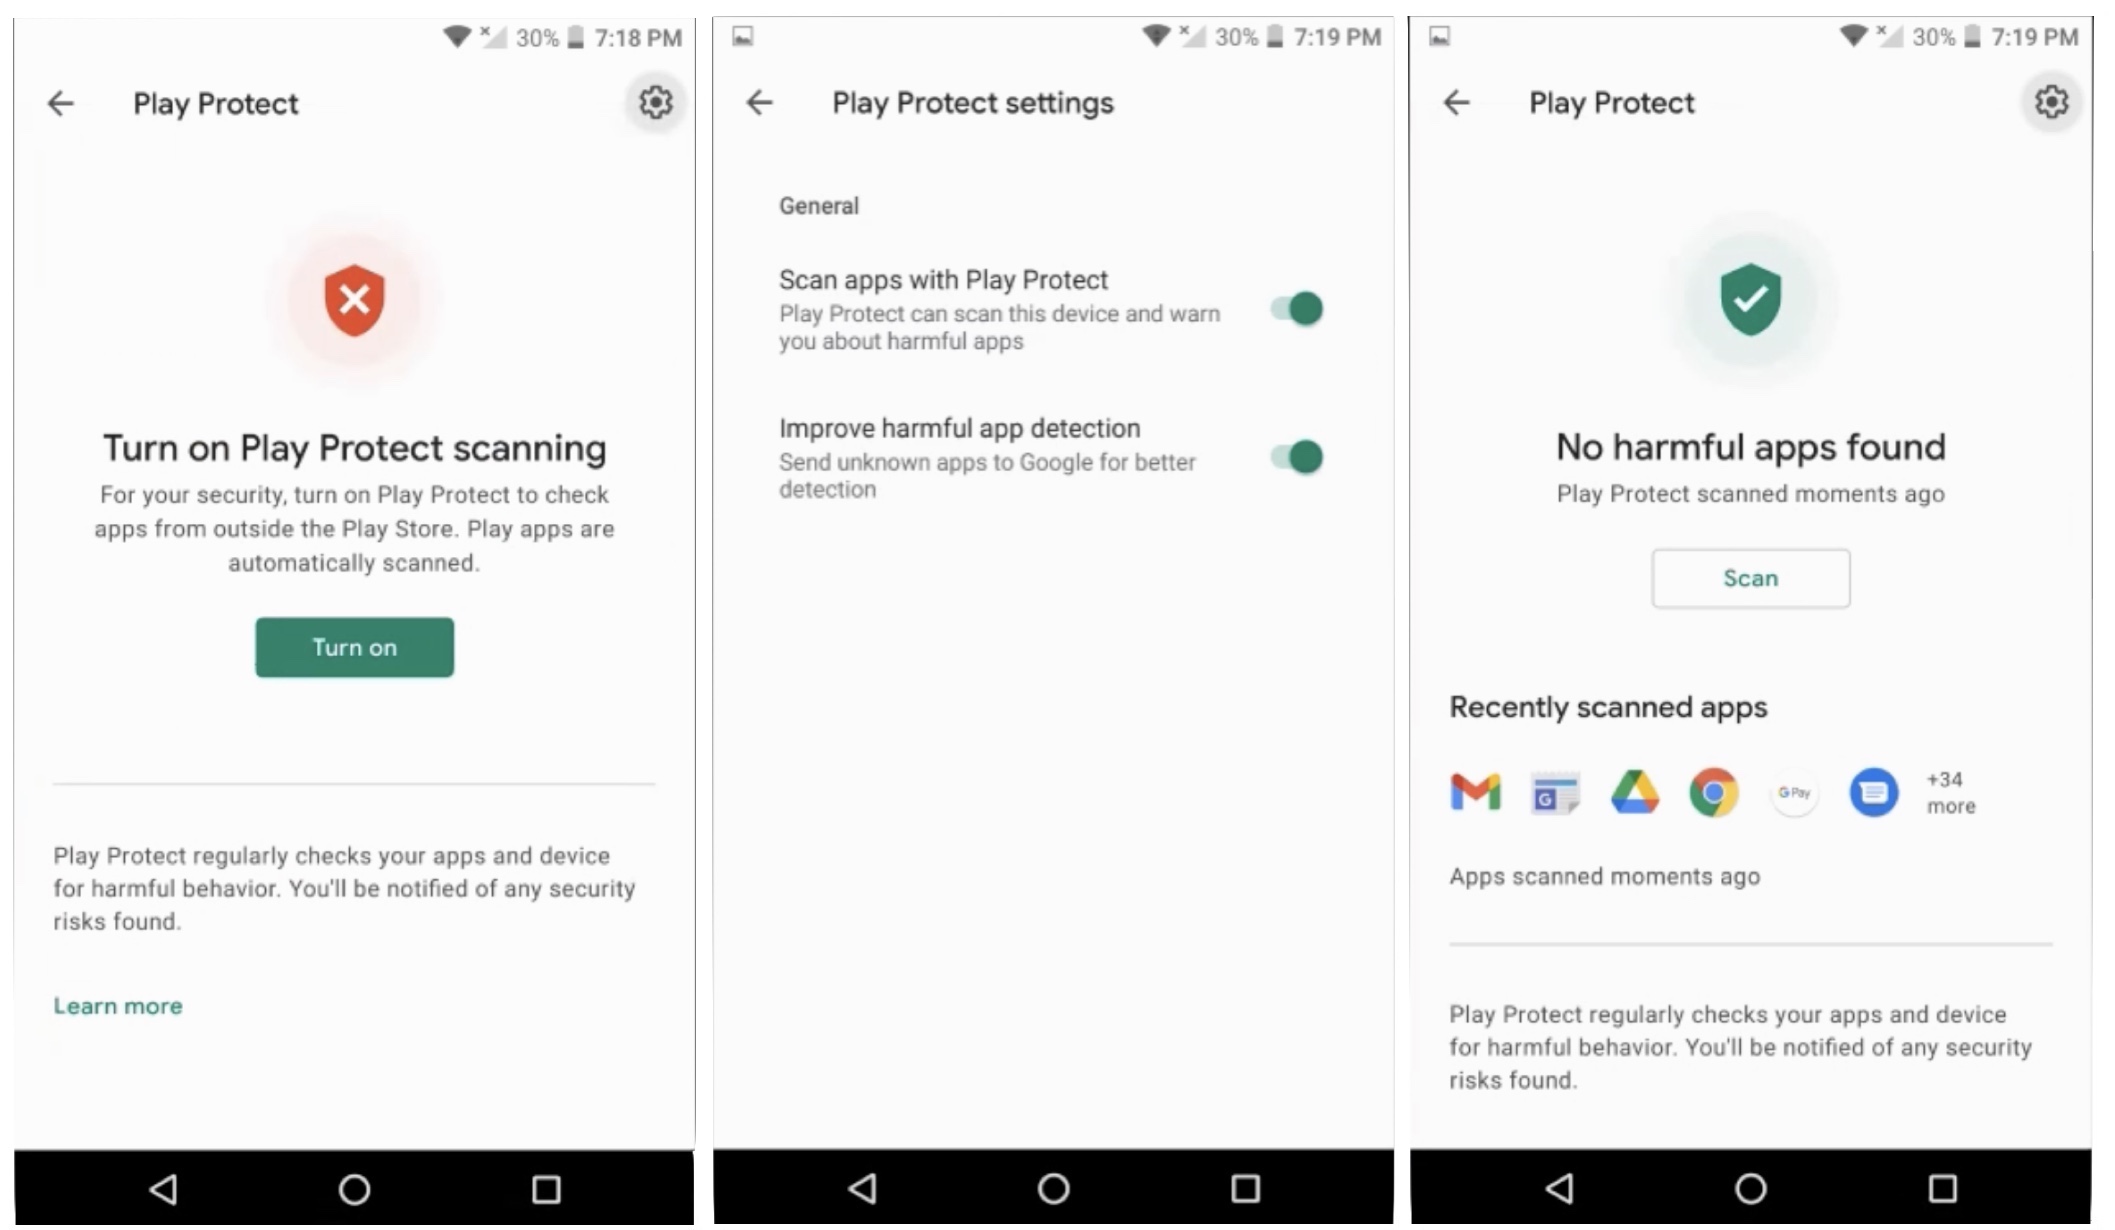 Screenshots showing Google Play Protect, which should be enabled.